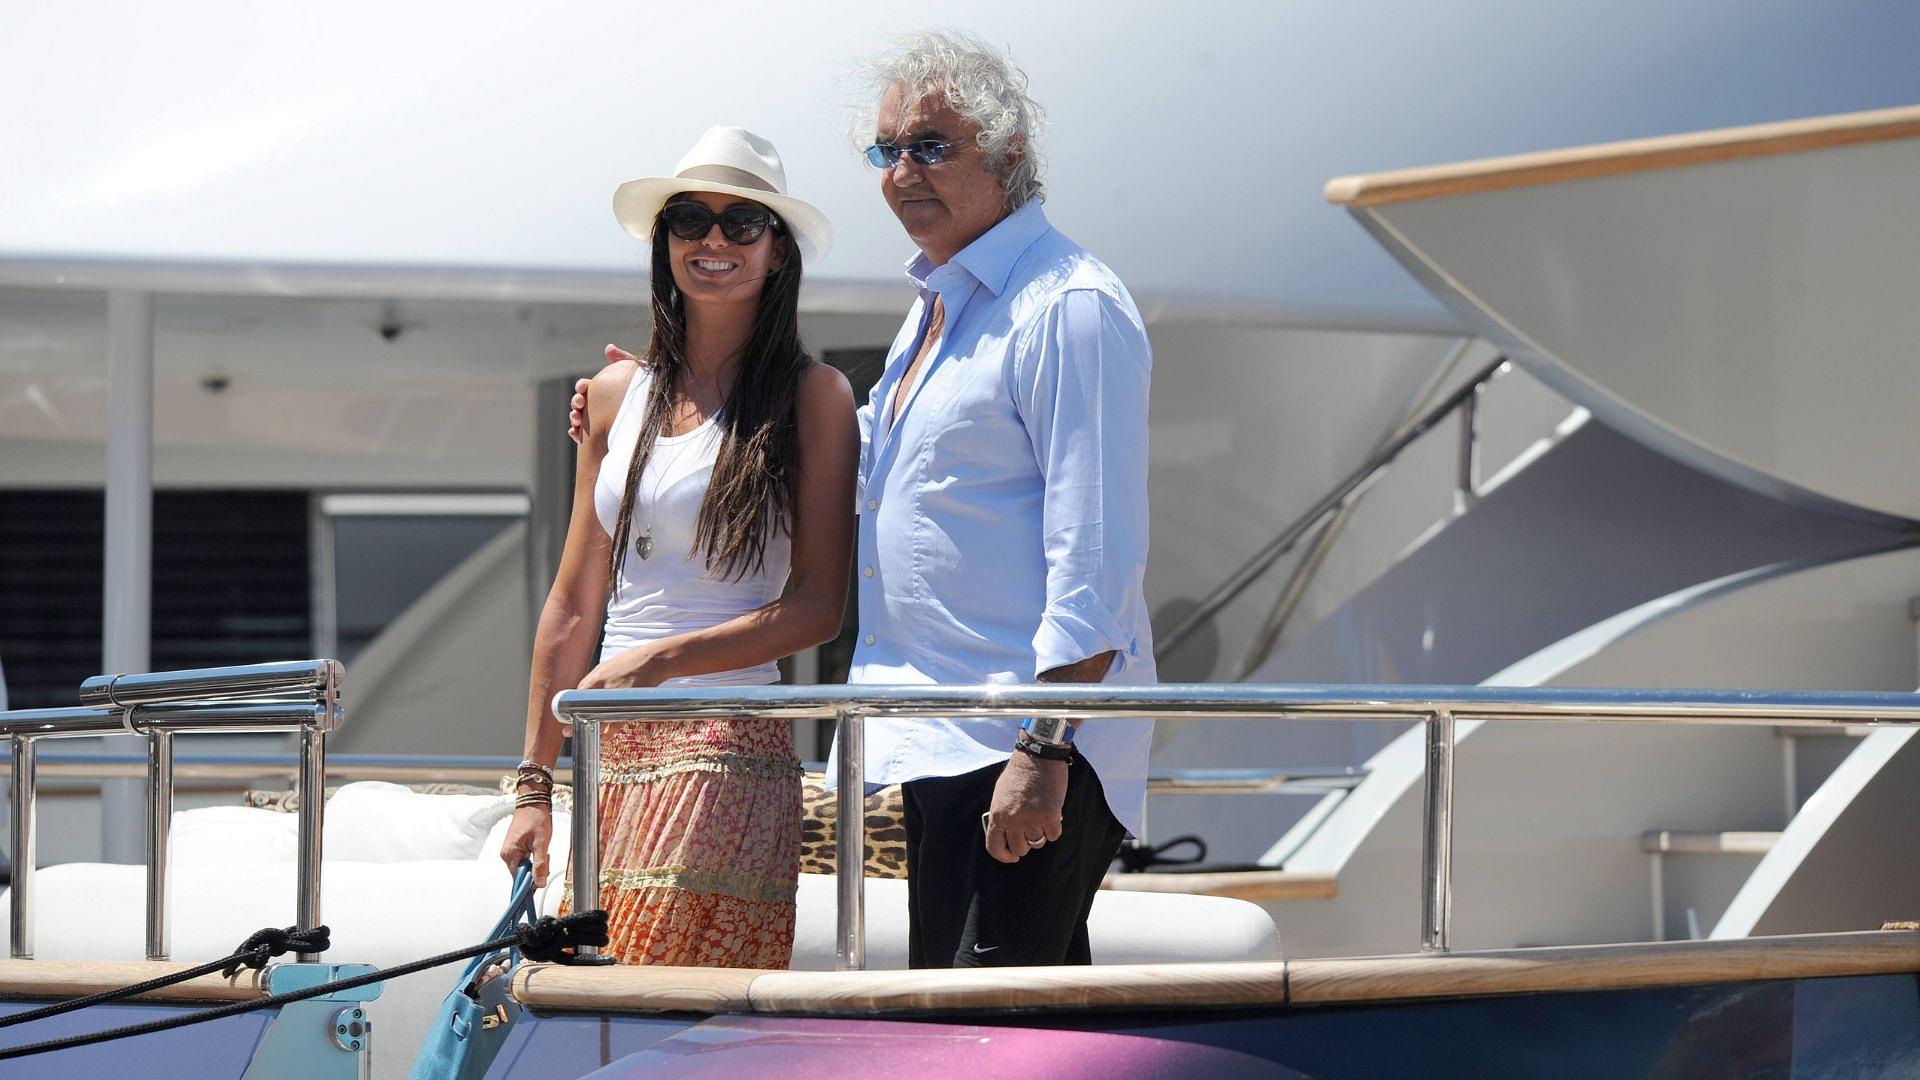 Eddie Jordan Explains How Flavio Briatore Managed to Have His Ex-Wife and Four Ex-Girlfriends Together on One Boat